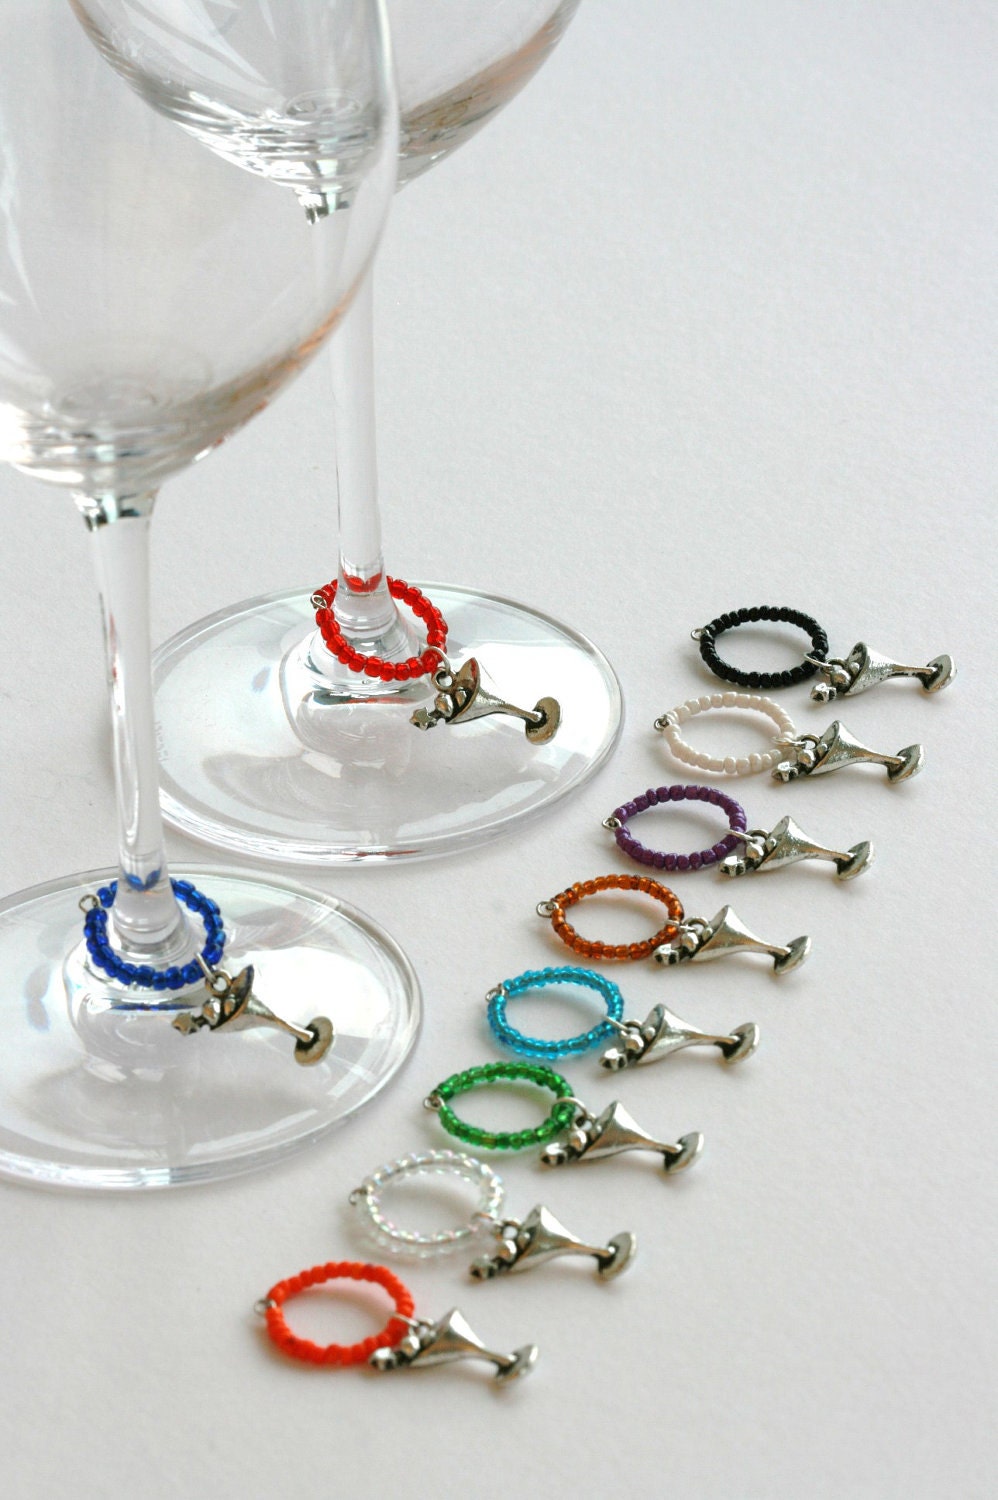 6 X SILVER PLATED HEDGEHOG WINE GLASS CHARMS BIRTHDAY GIFT HEN PARTY BBQ 